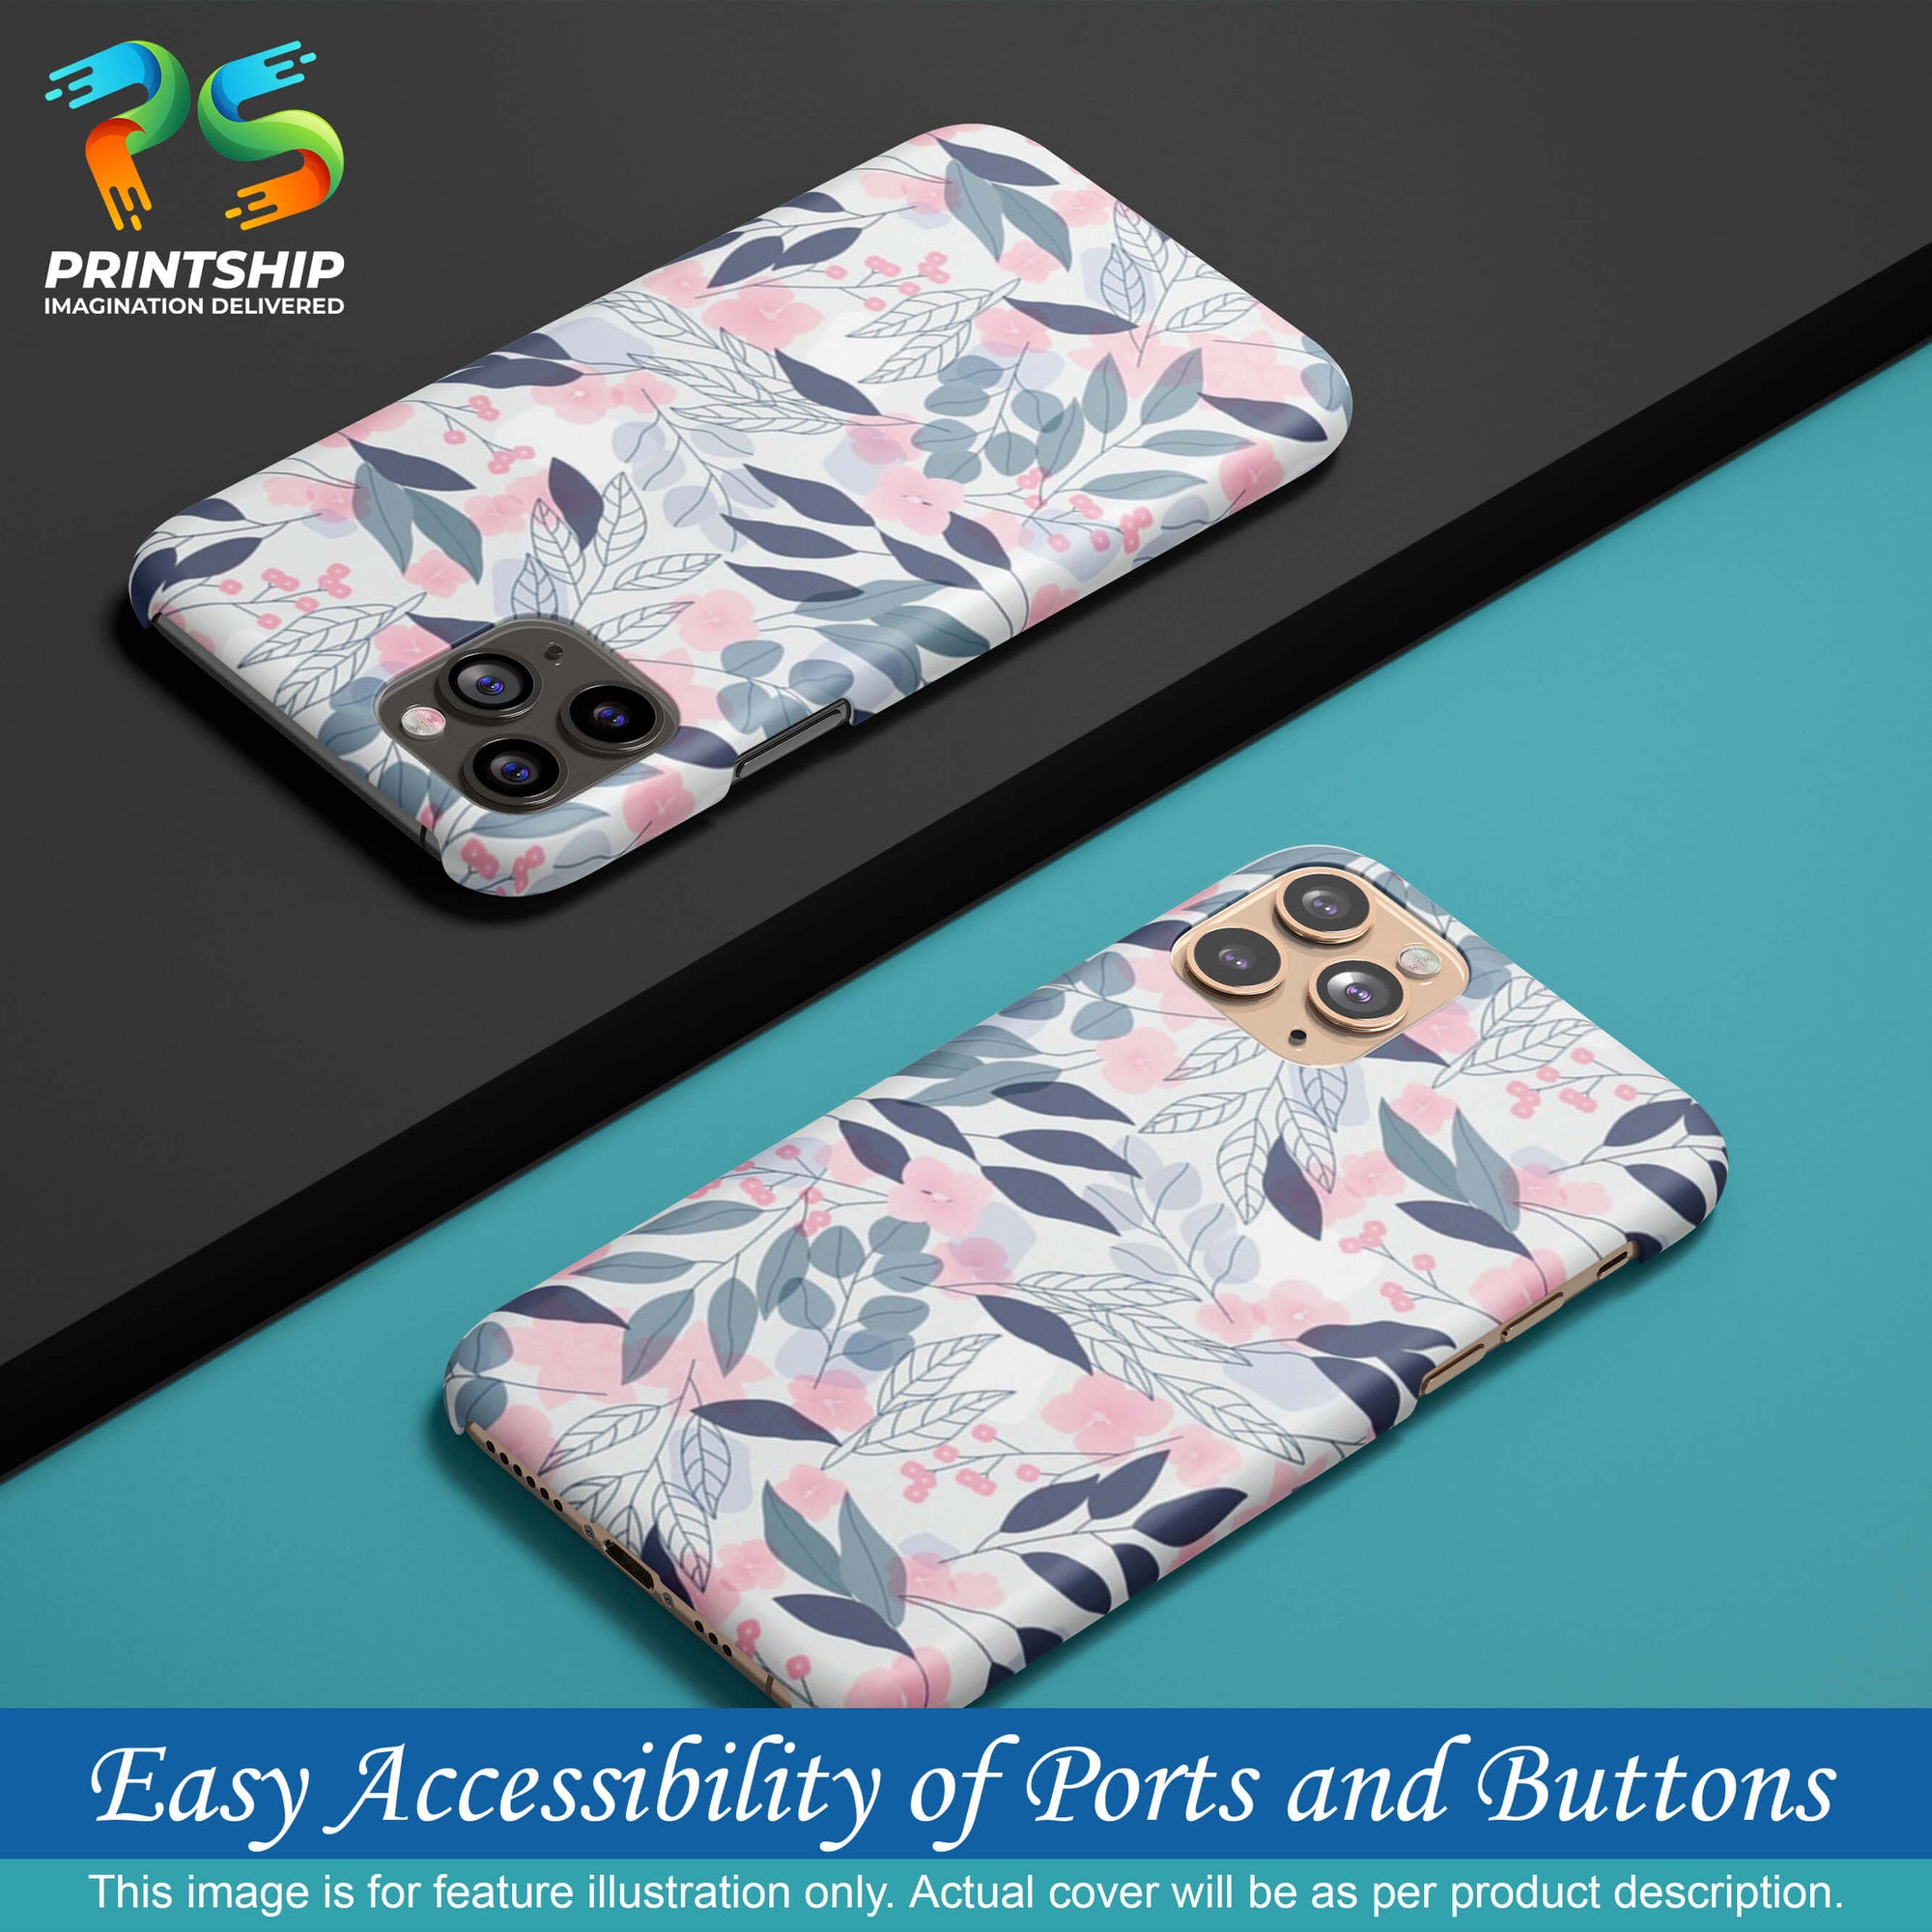 PS1333-Flowery Patterns Back Cover for Apple iPhone 7 Plus-Image5